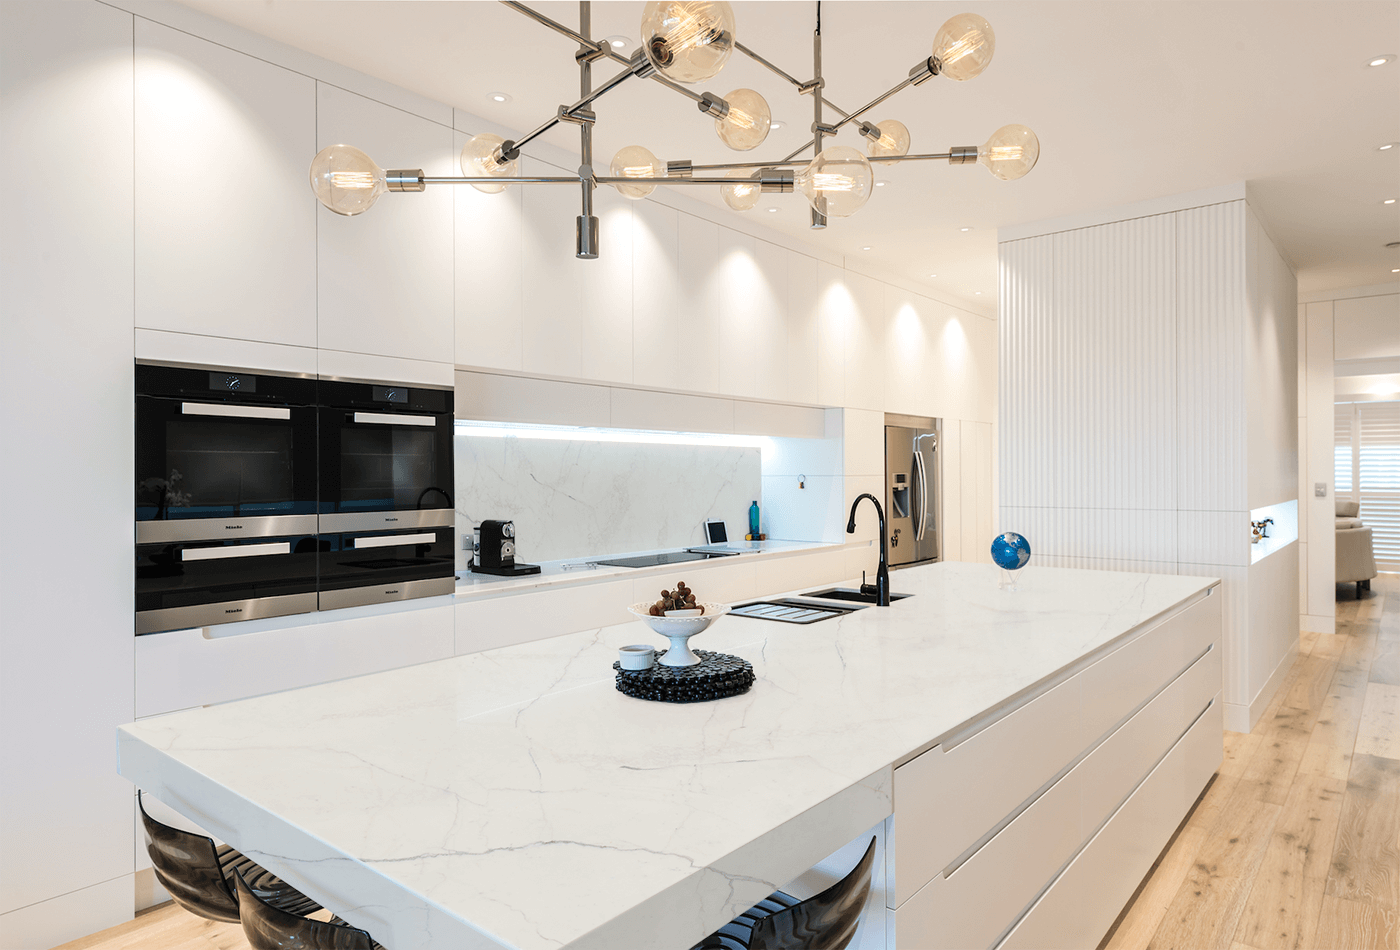 Why Choose Porcelain for Kitchen Surfaces